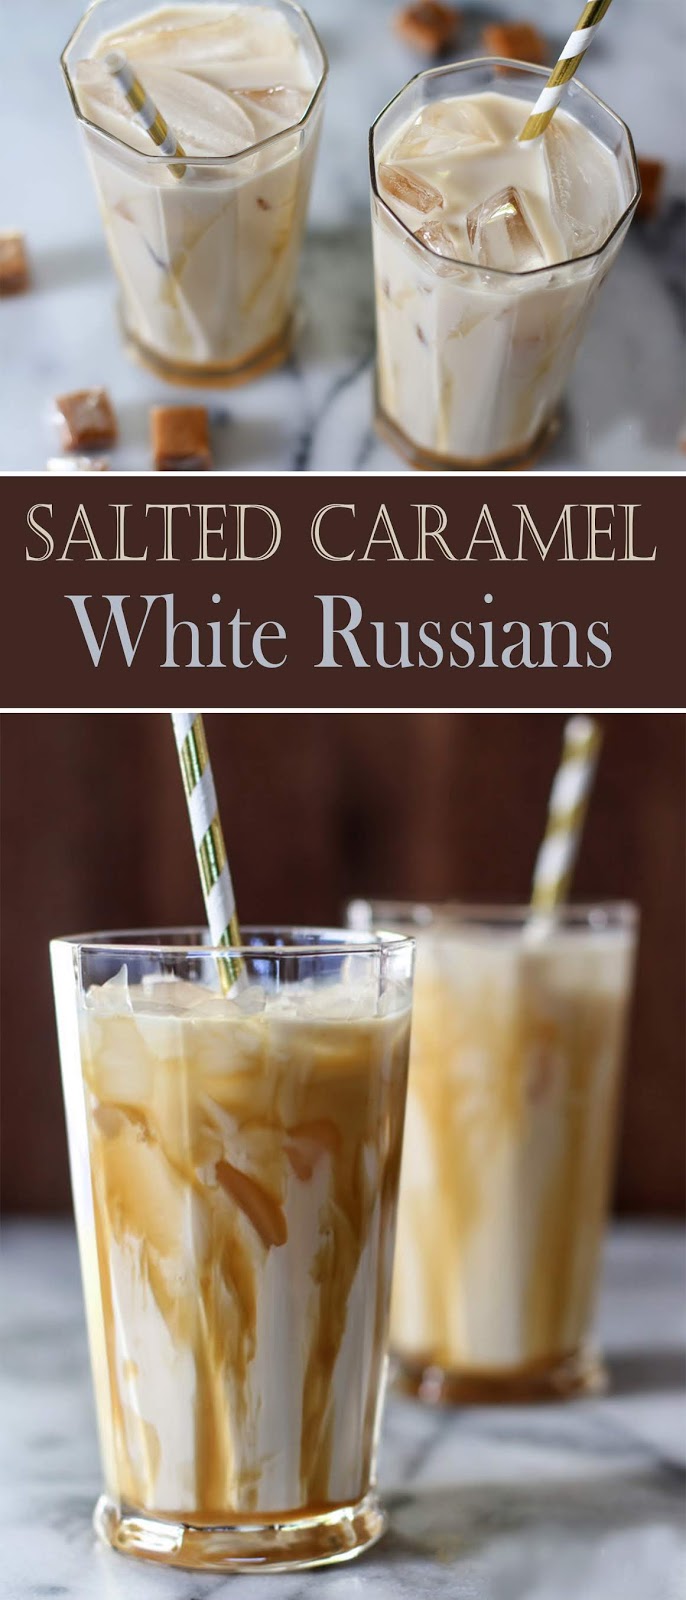 Salted Caramel White Russians - NEW RECIPES